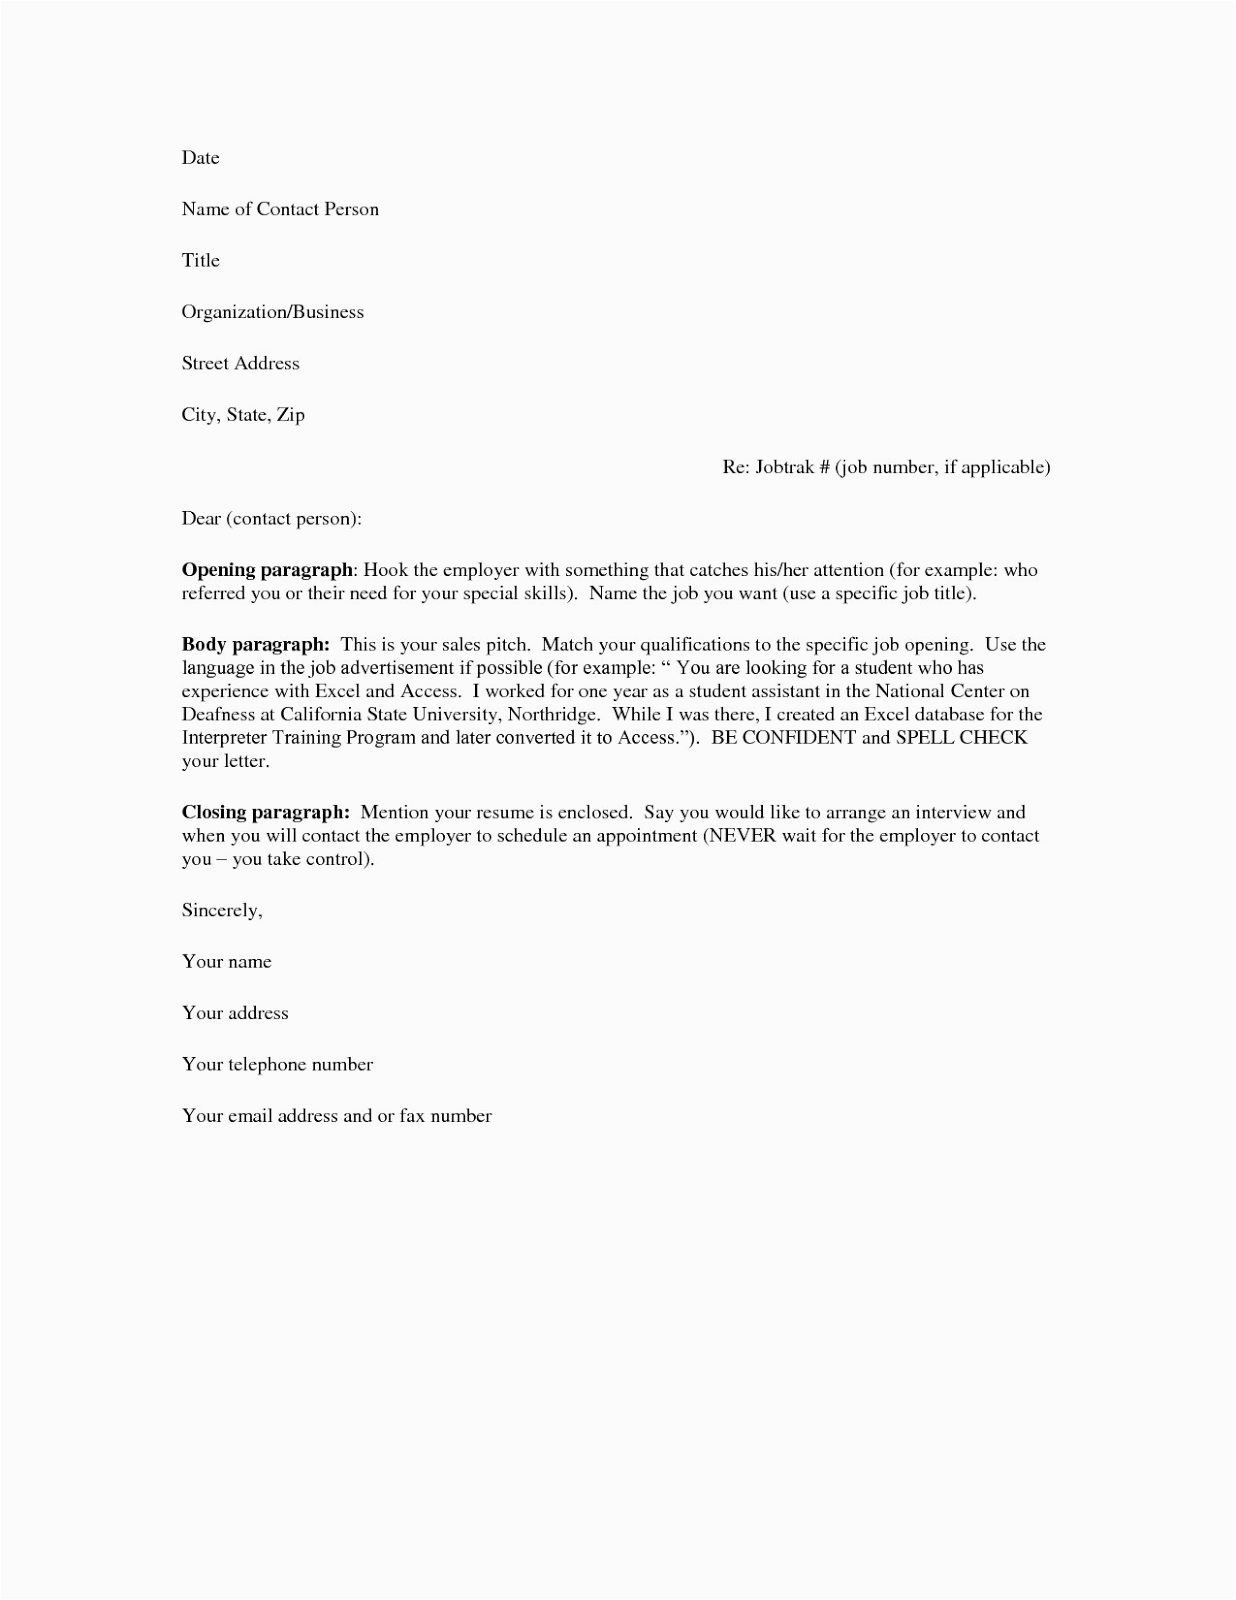 Free Sample Resume Cover Letter Template Free Cover Letter Samples for Resumes